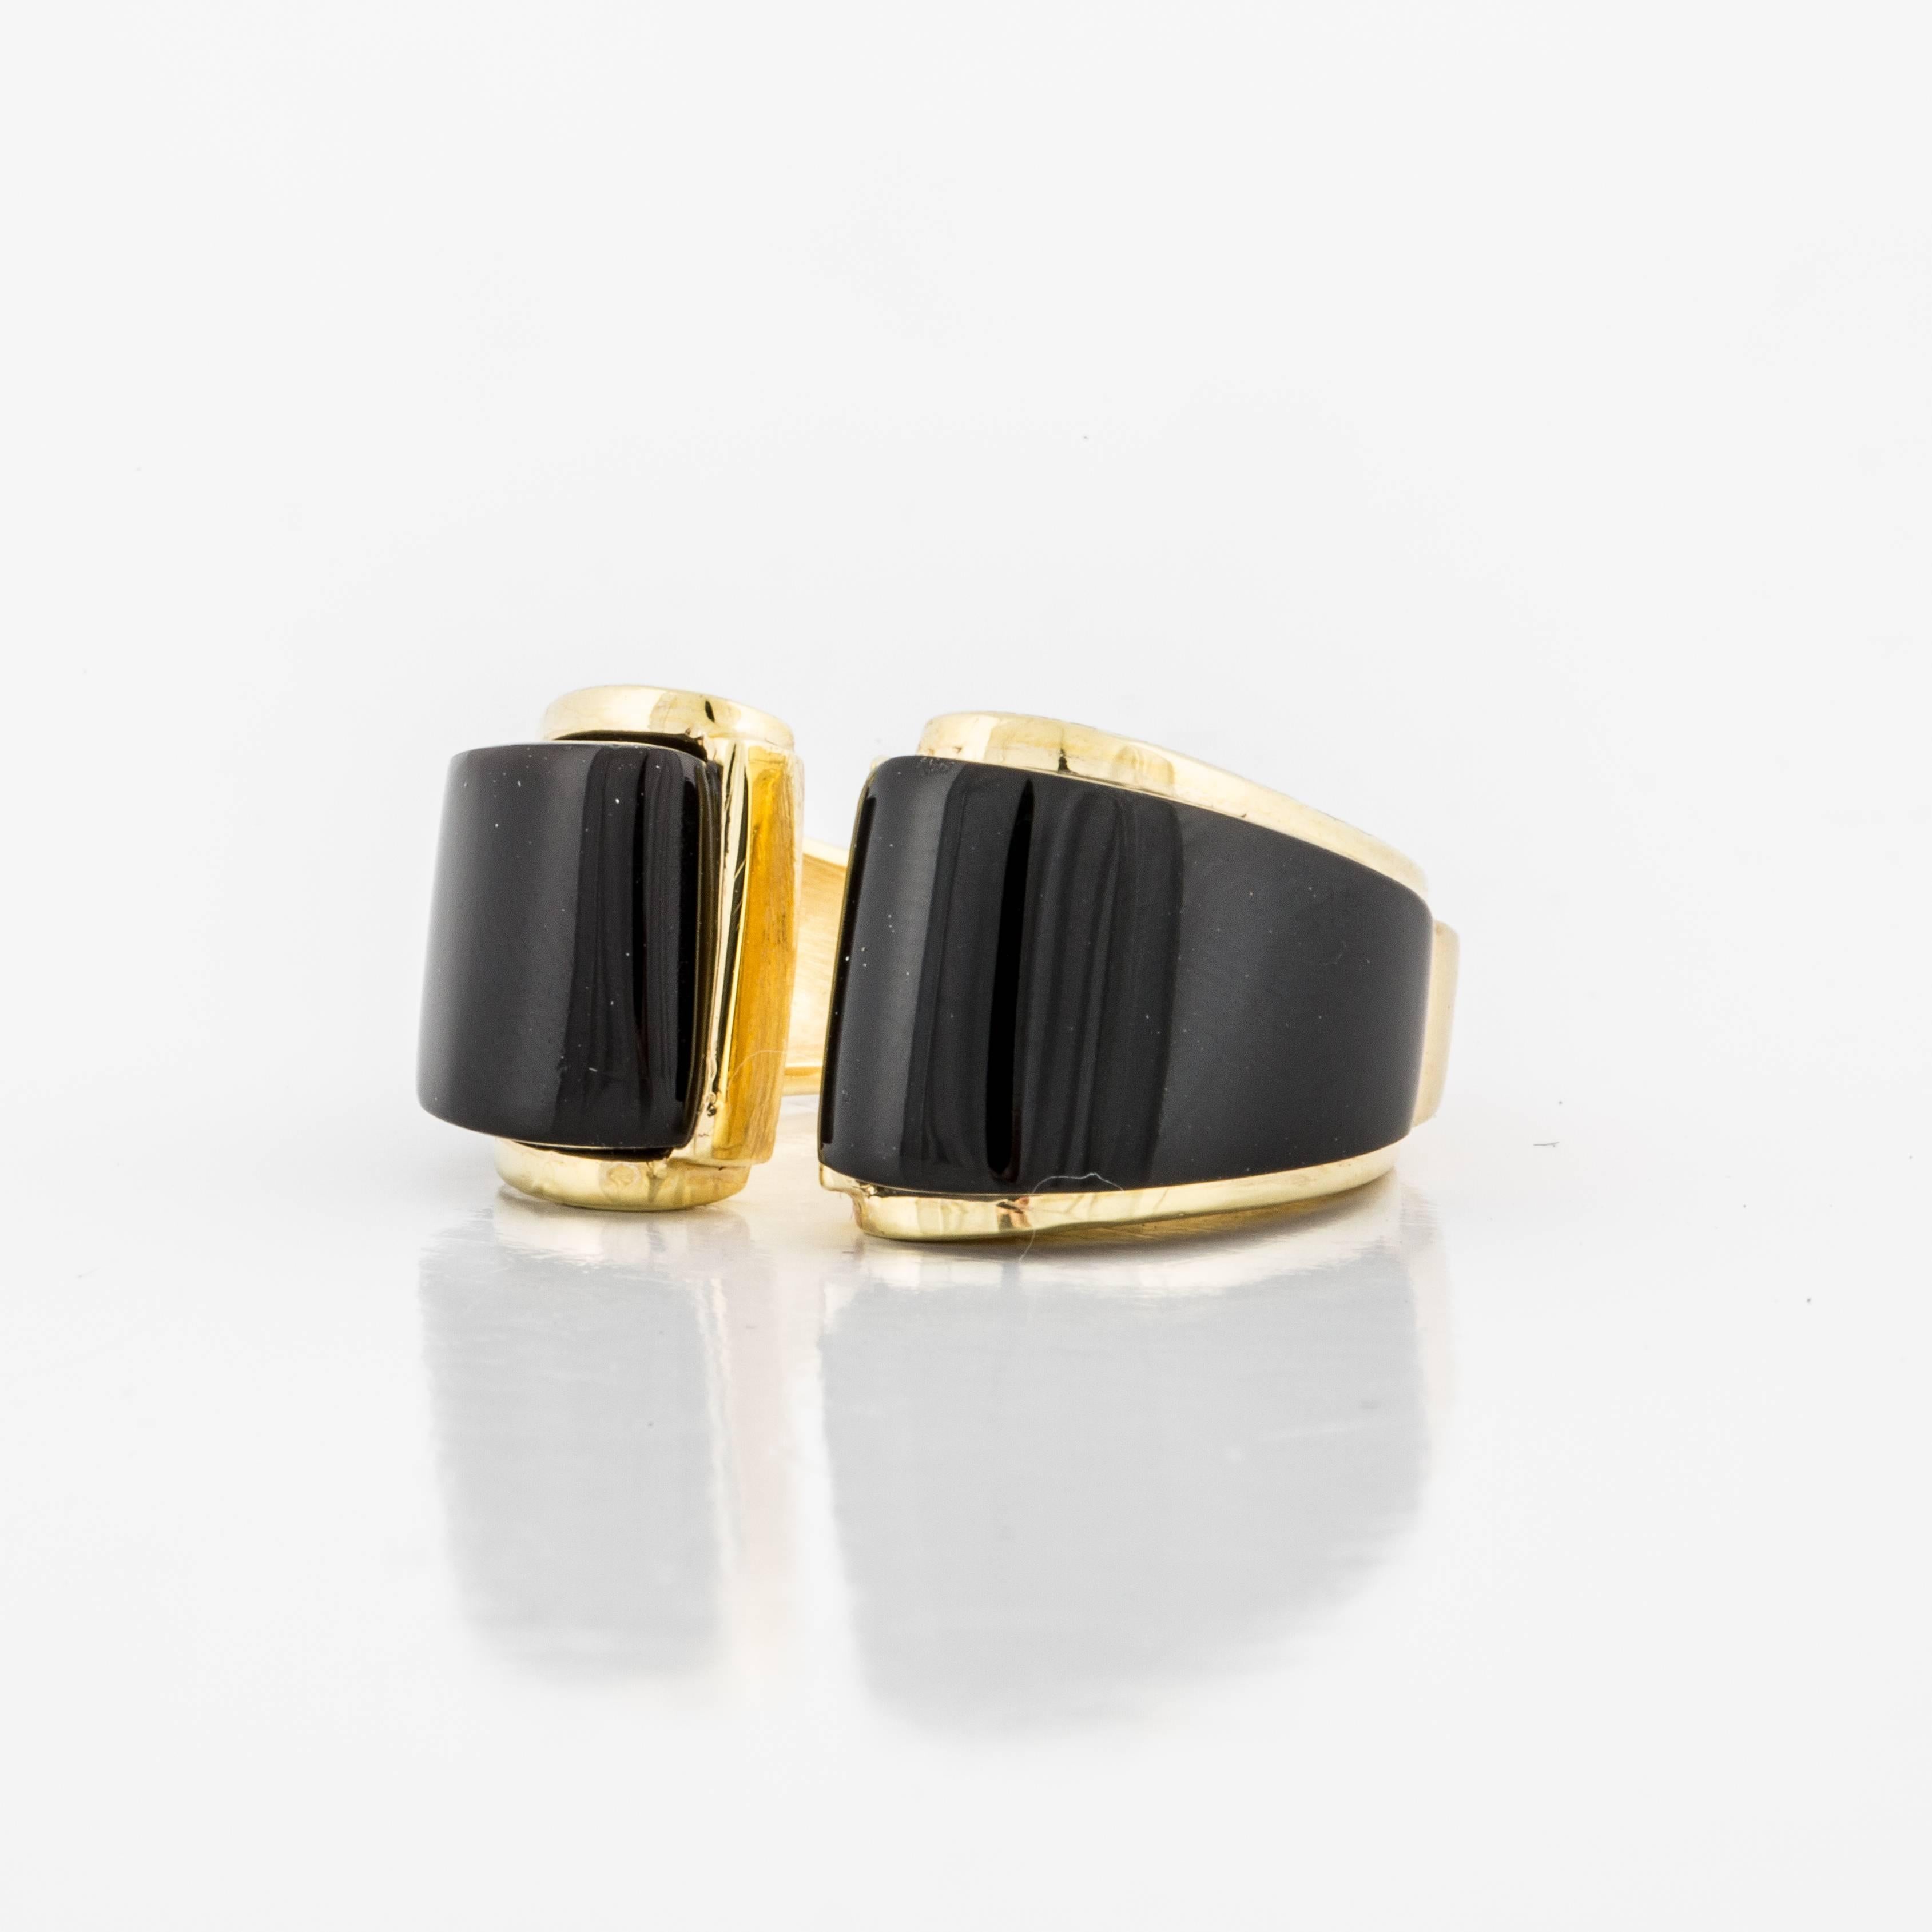 Estate Mazza ring composed of 14K yellow gold and onyx.  The ring is marked 